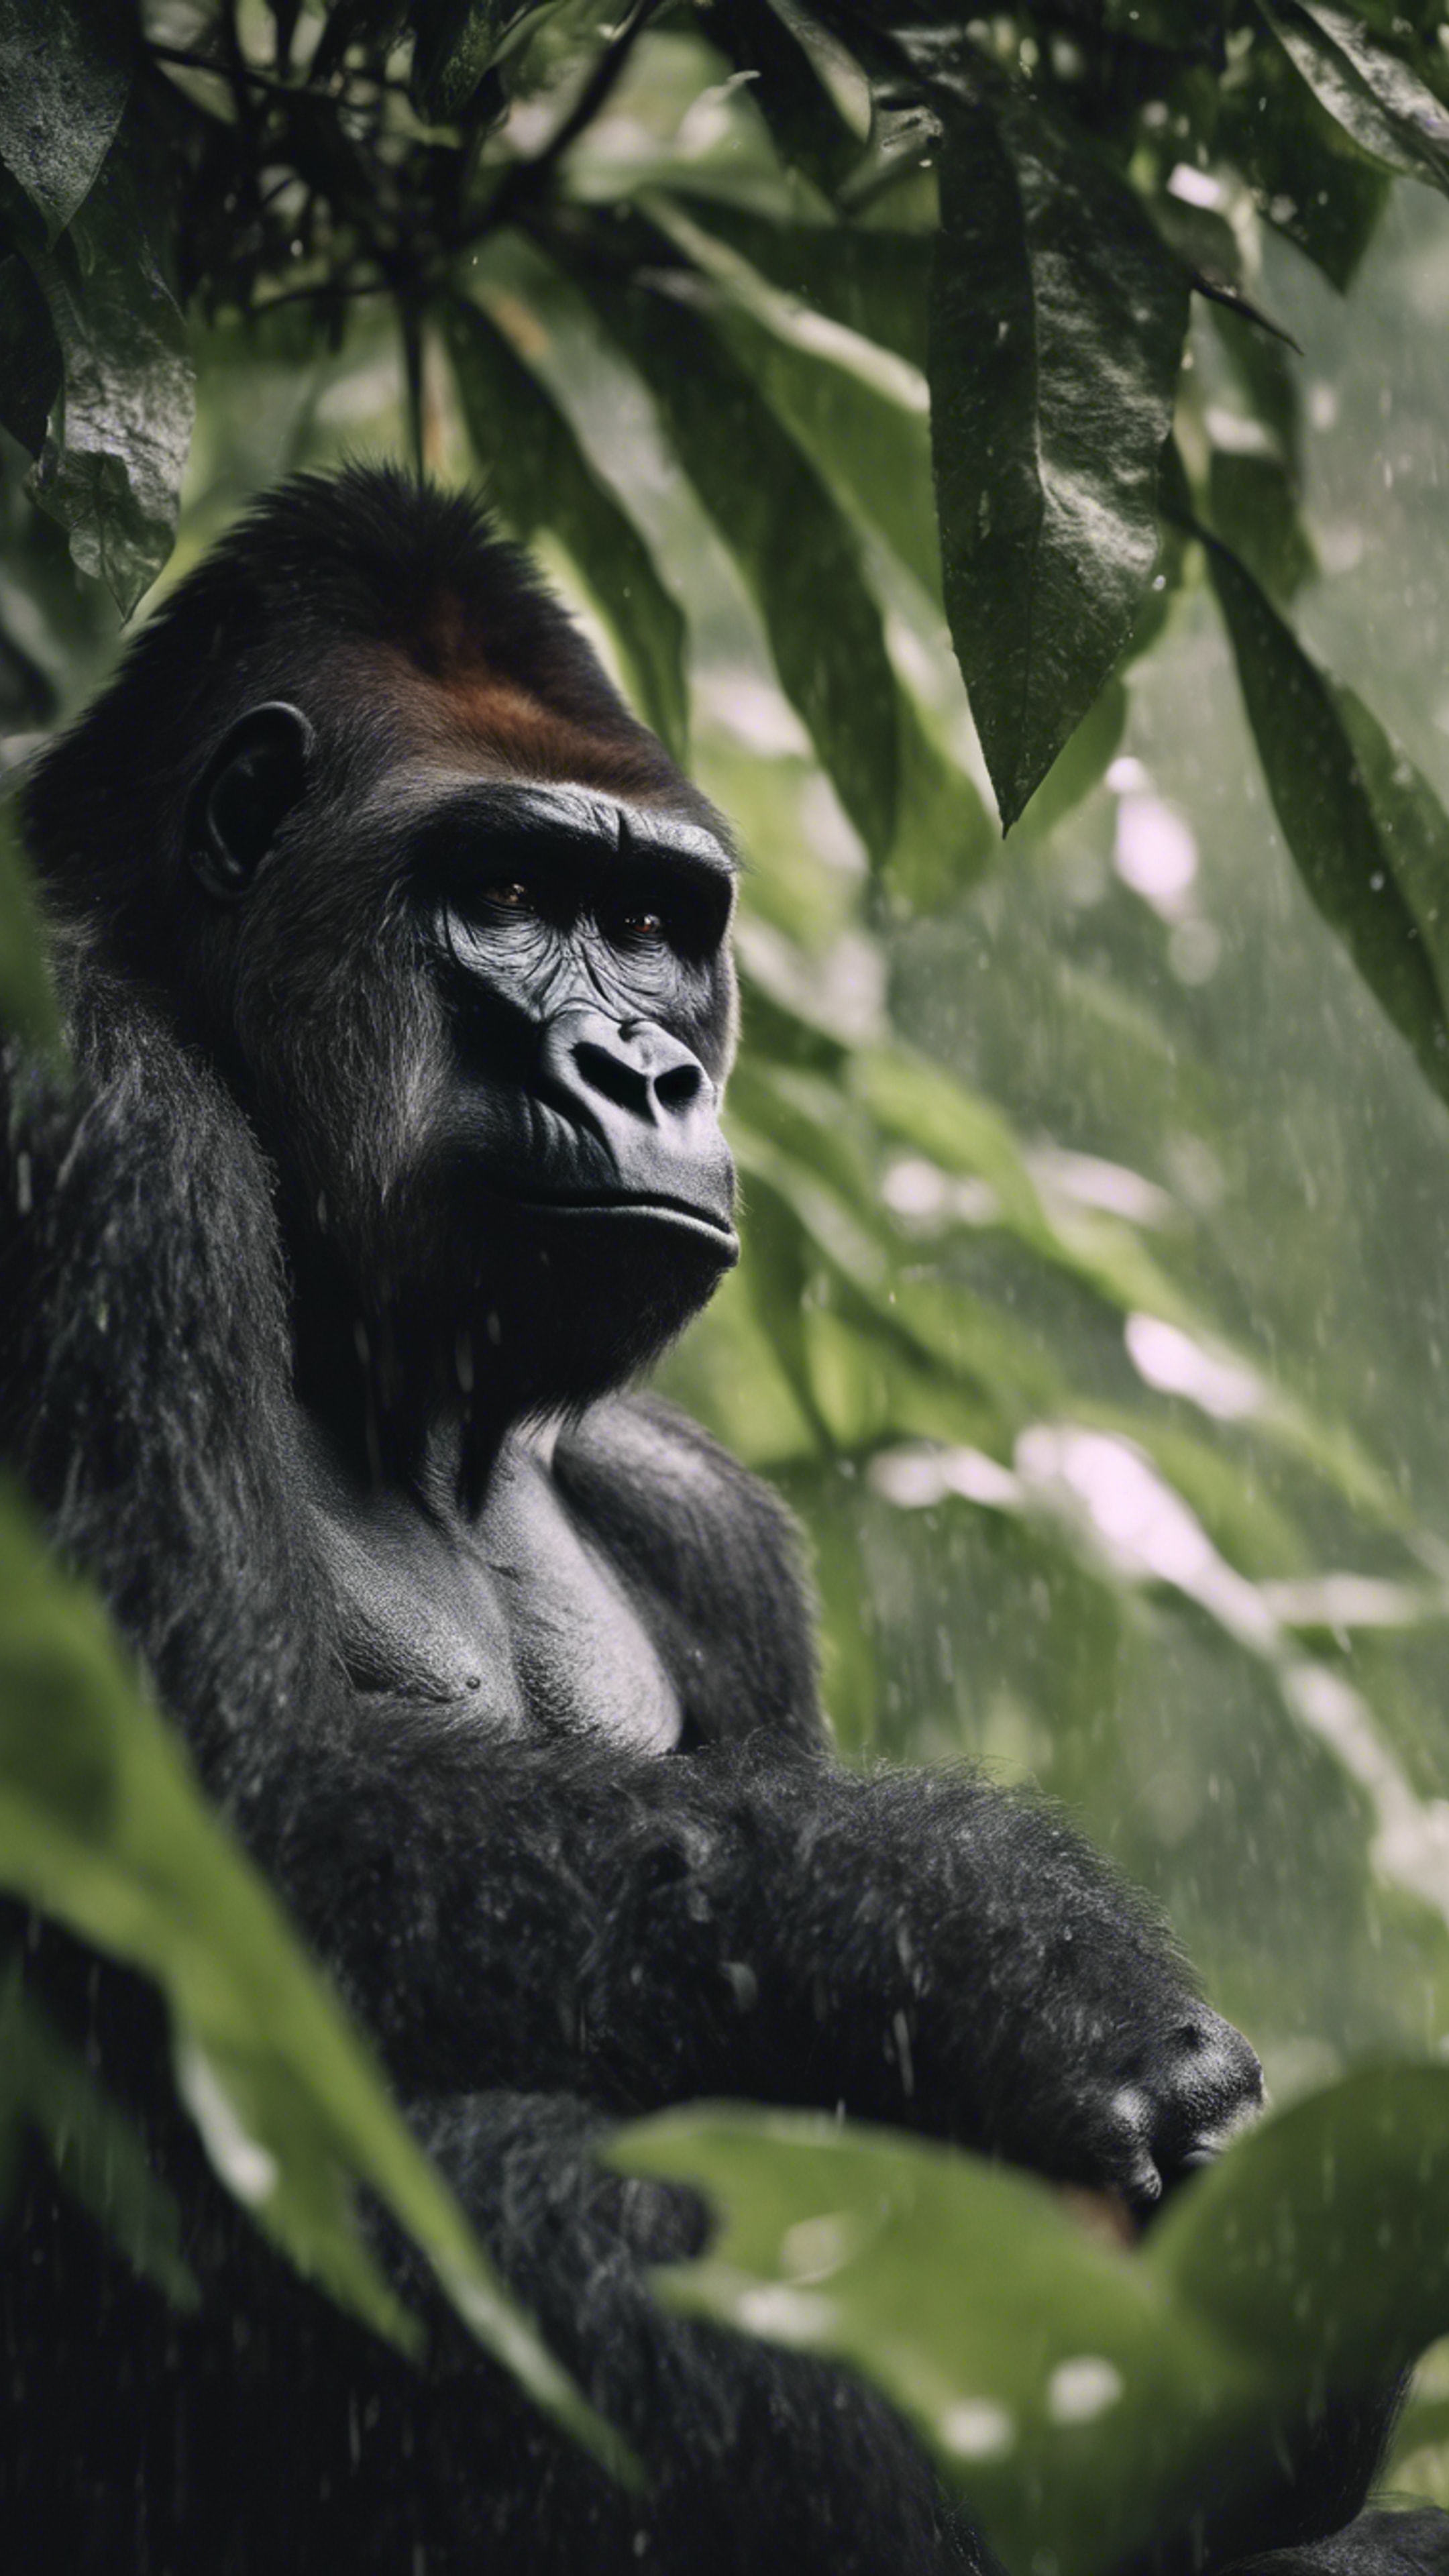 A sad gorilla on a rainy day, gazing out from under the shelter of giant leaves. Taustakuva[ce7c66a51f504b8e8f6d]